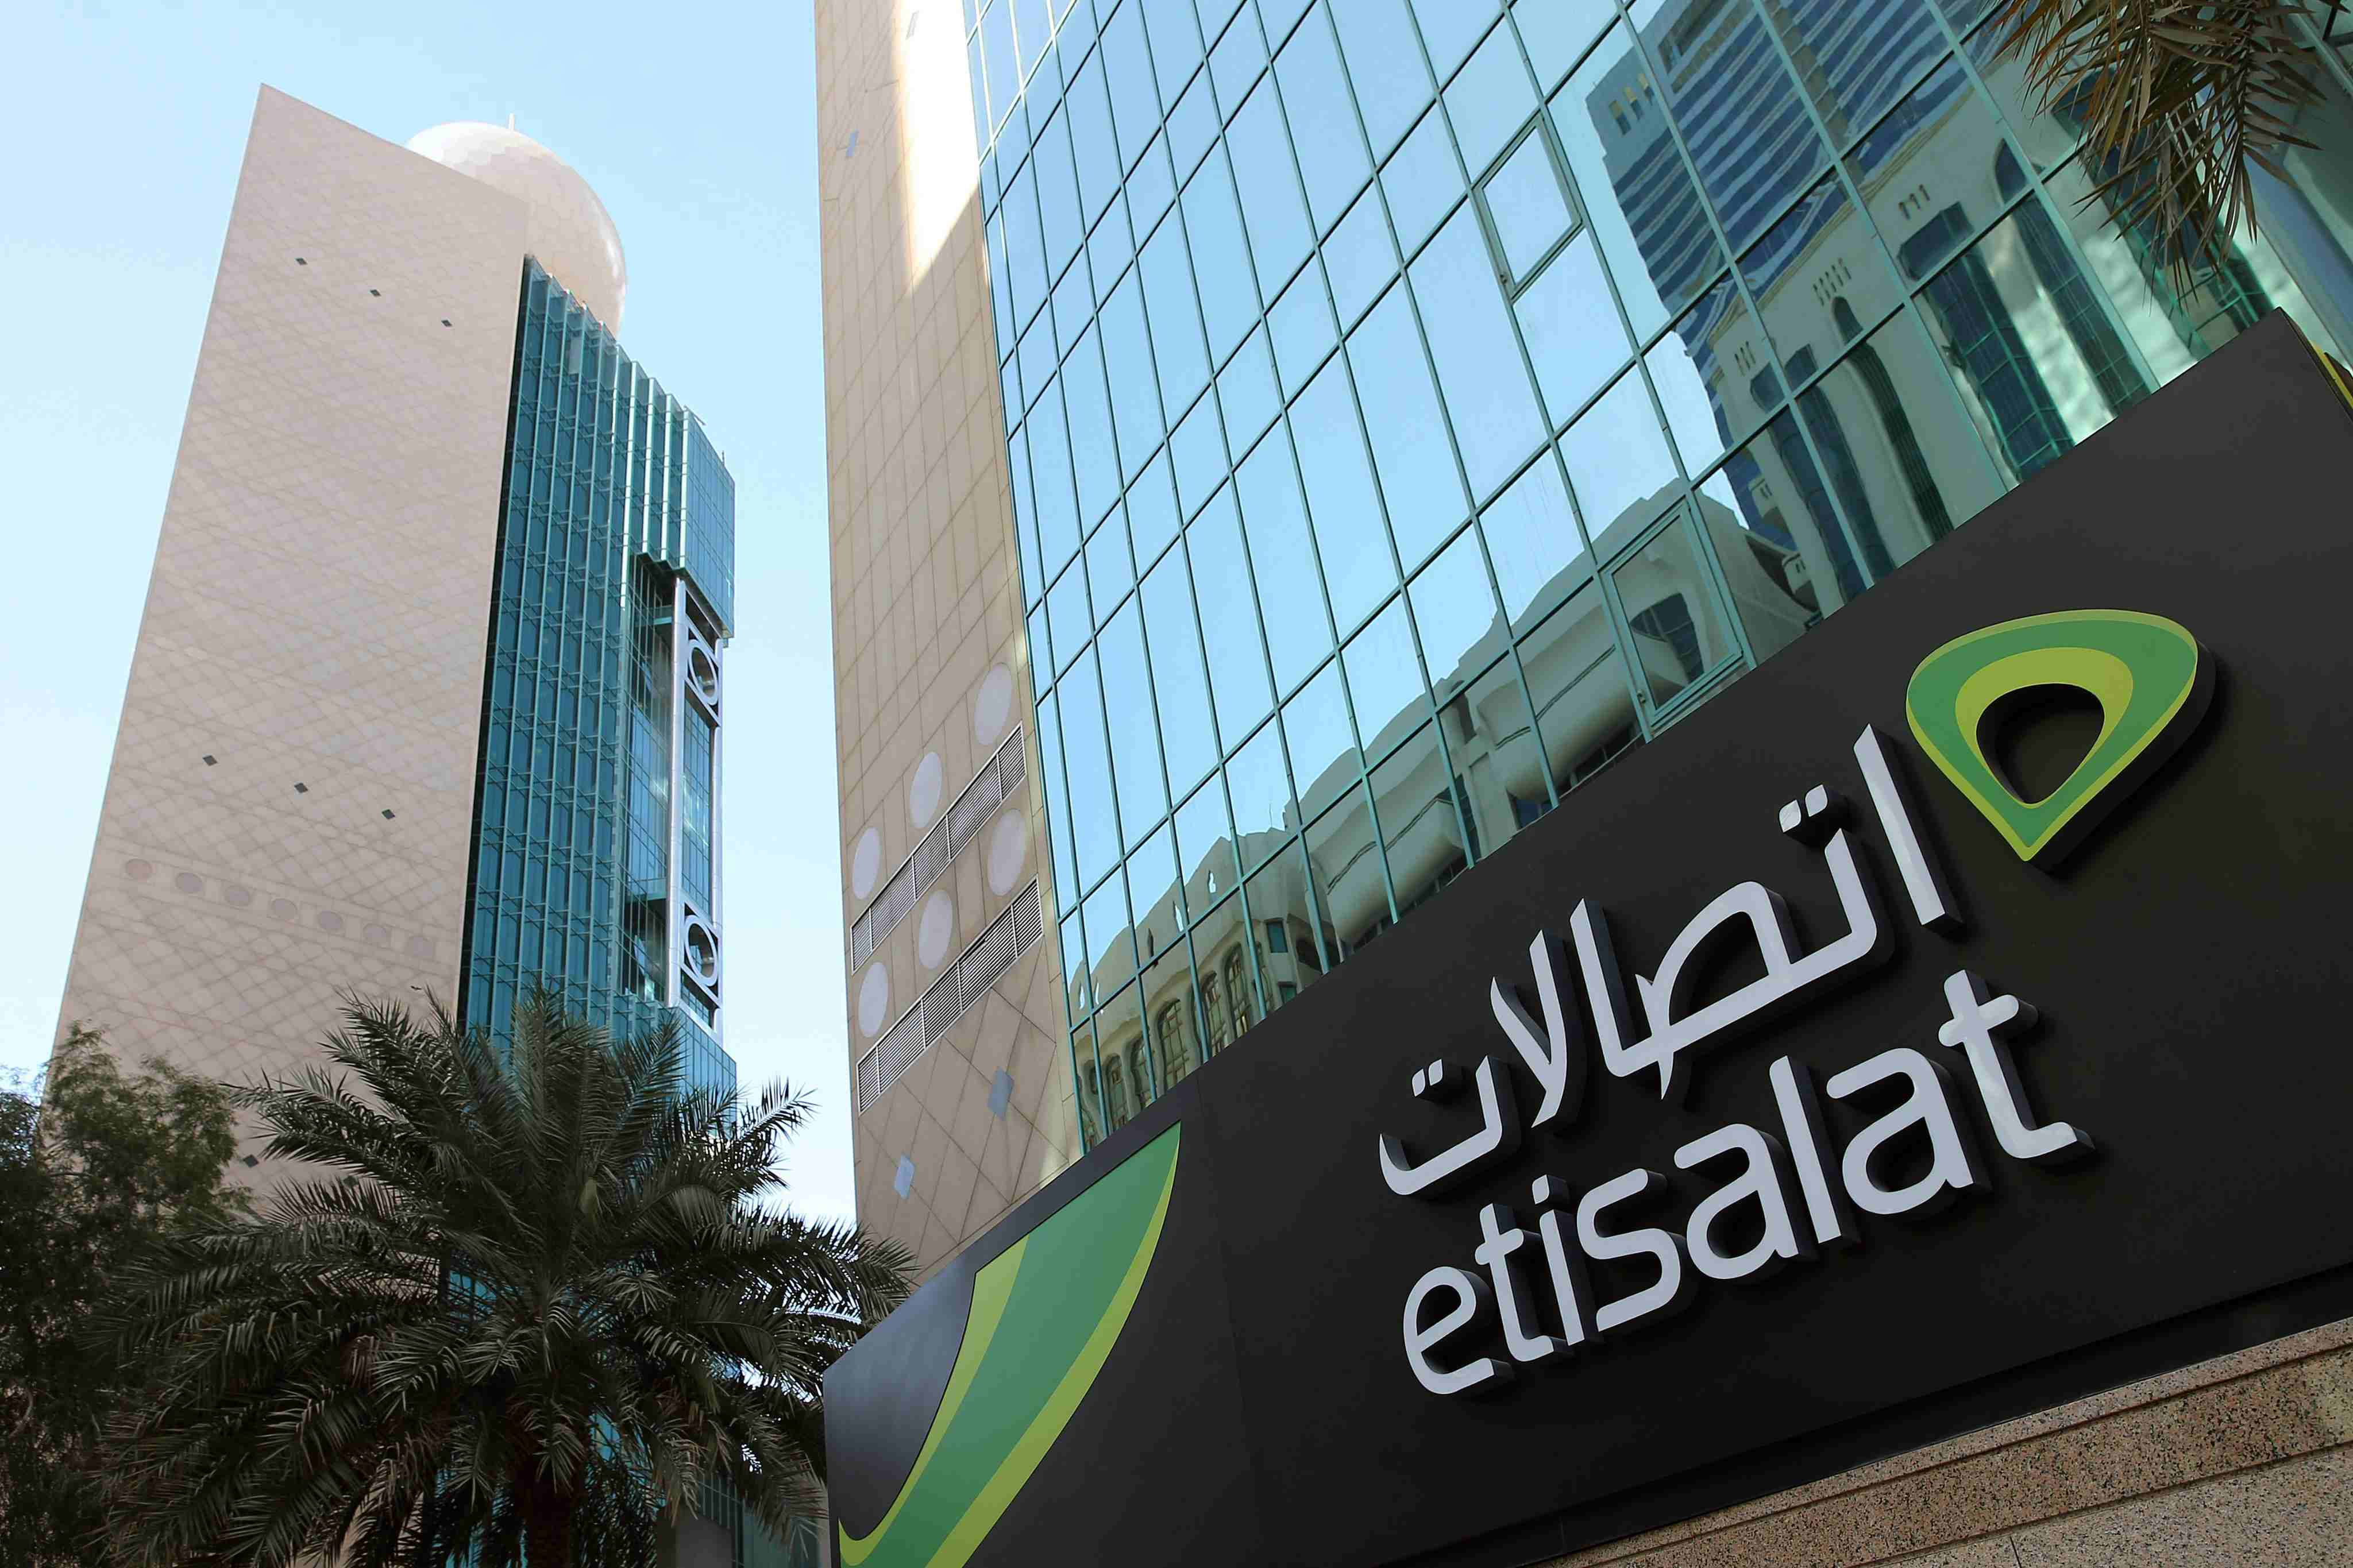 16-facts-about-etisalat